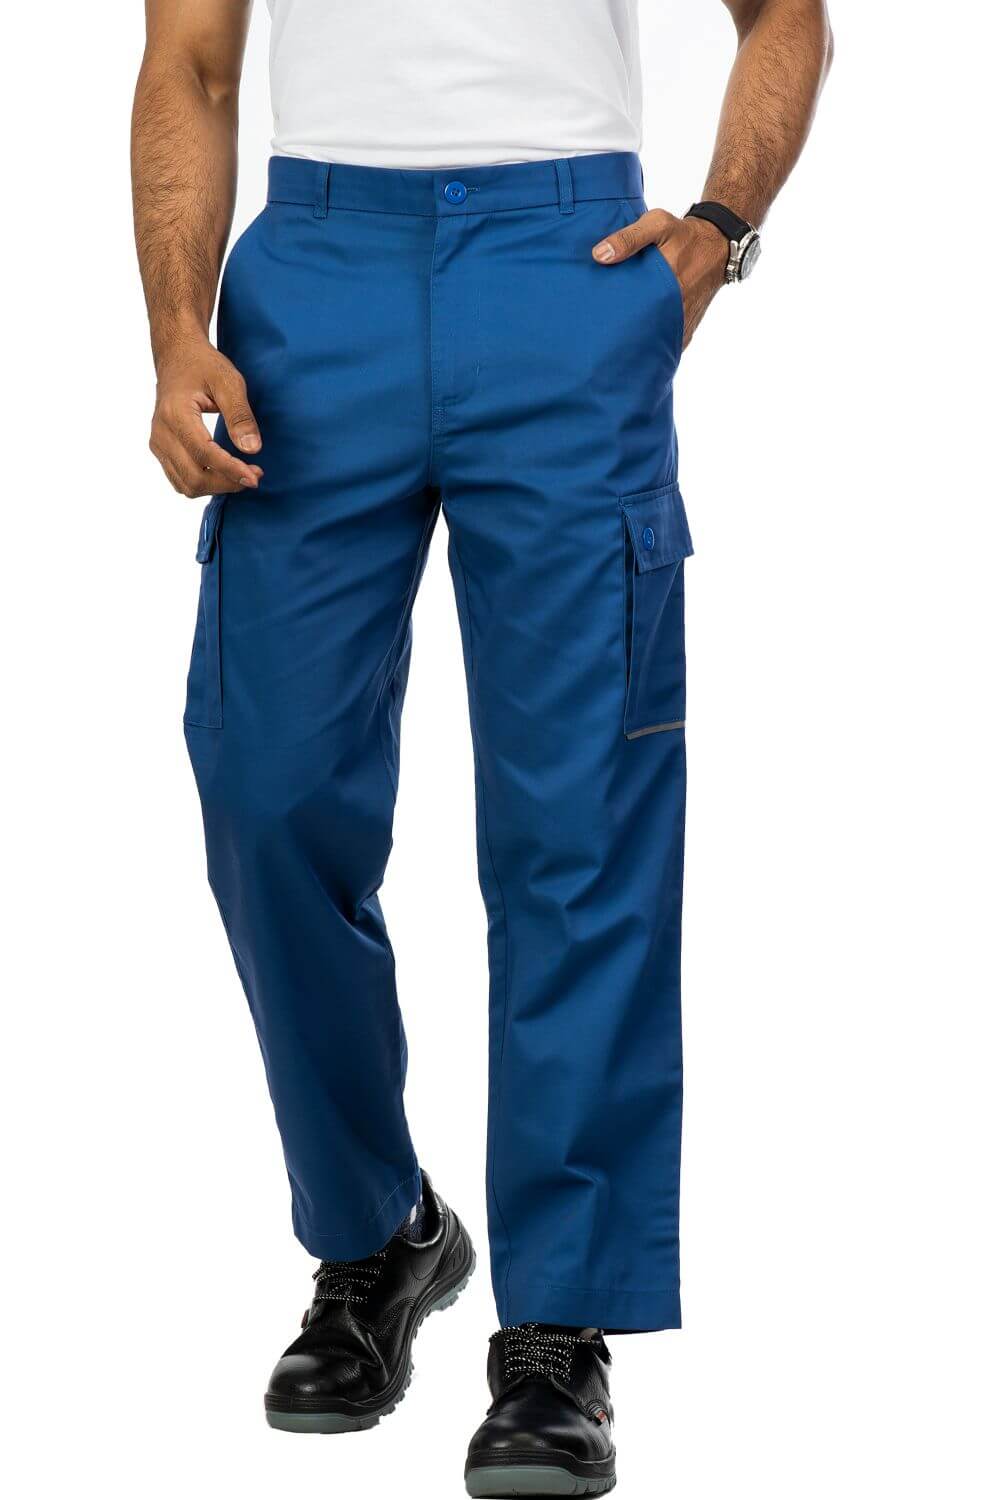 Modern straight cut, with a classic button and zip fastening Blue Cargo Trouser